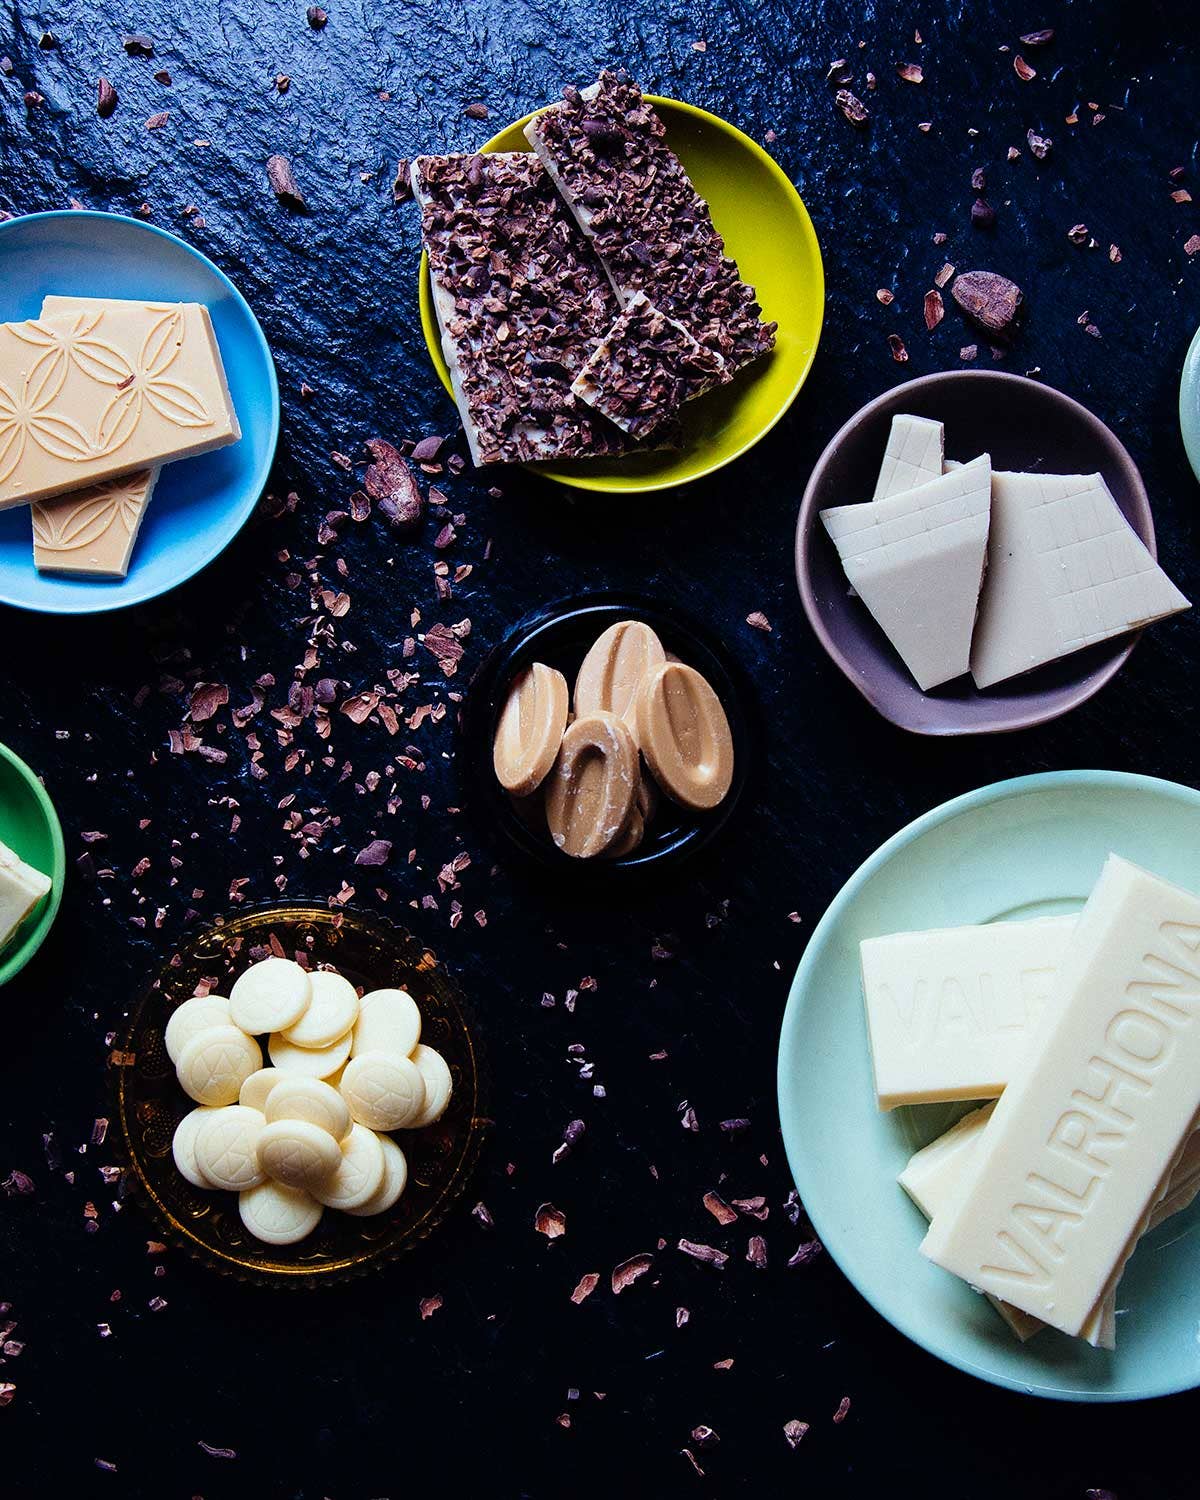 The World’s Best White Chocolates Deserve Your Respect